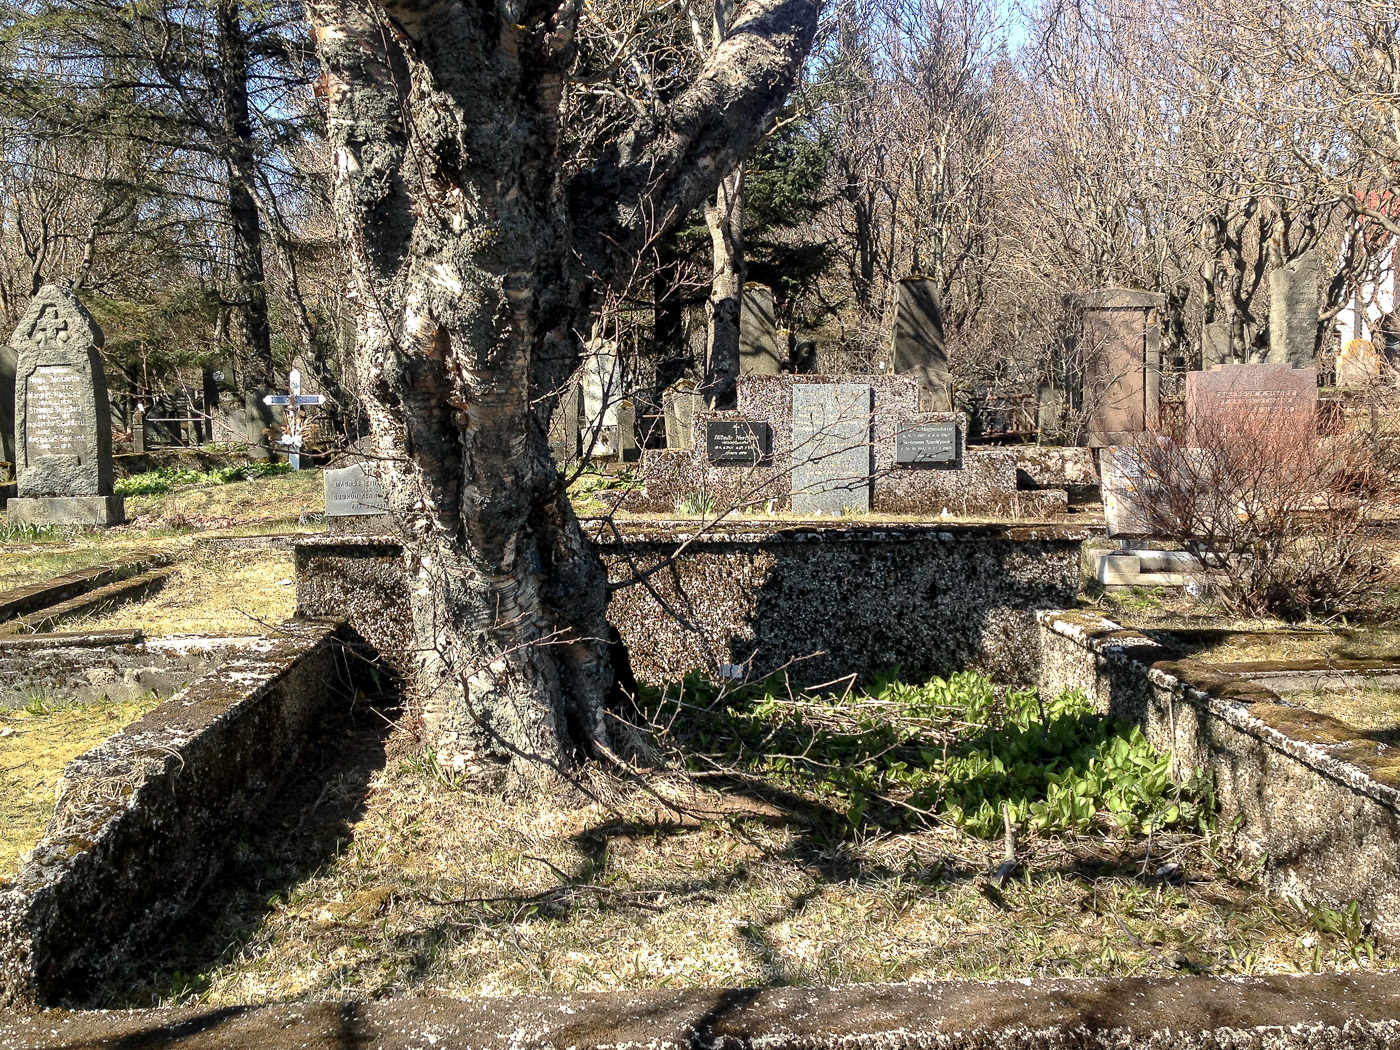 Reykjavík. Miscellaneous LXXXVII. - The old cementary ... And old trees! (2 till 22 May 2015)